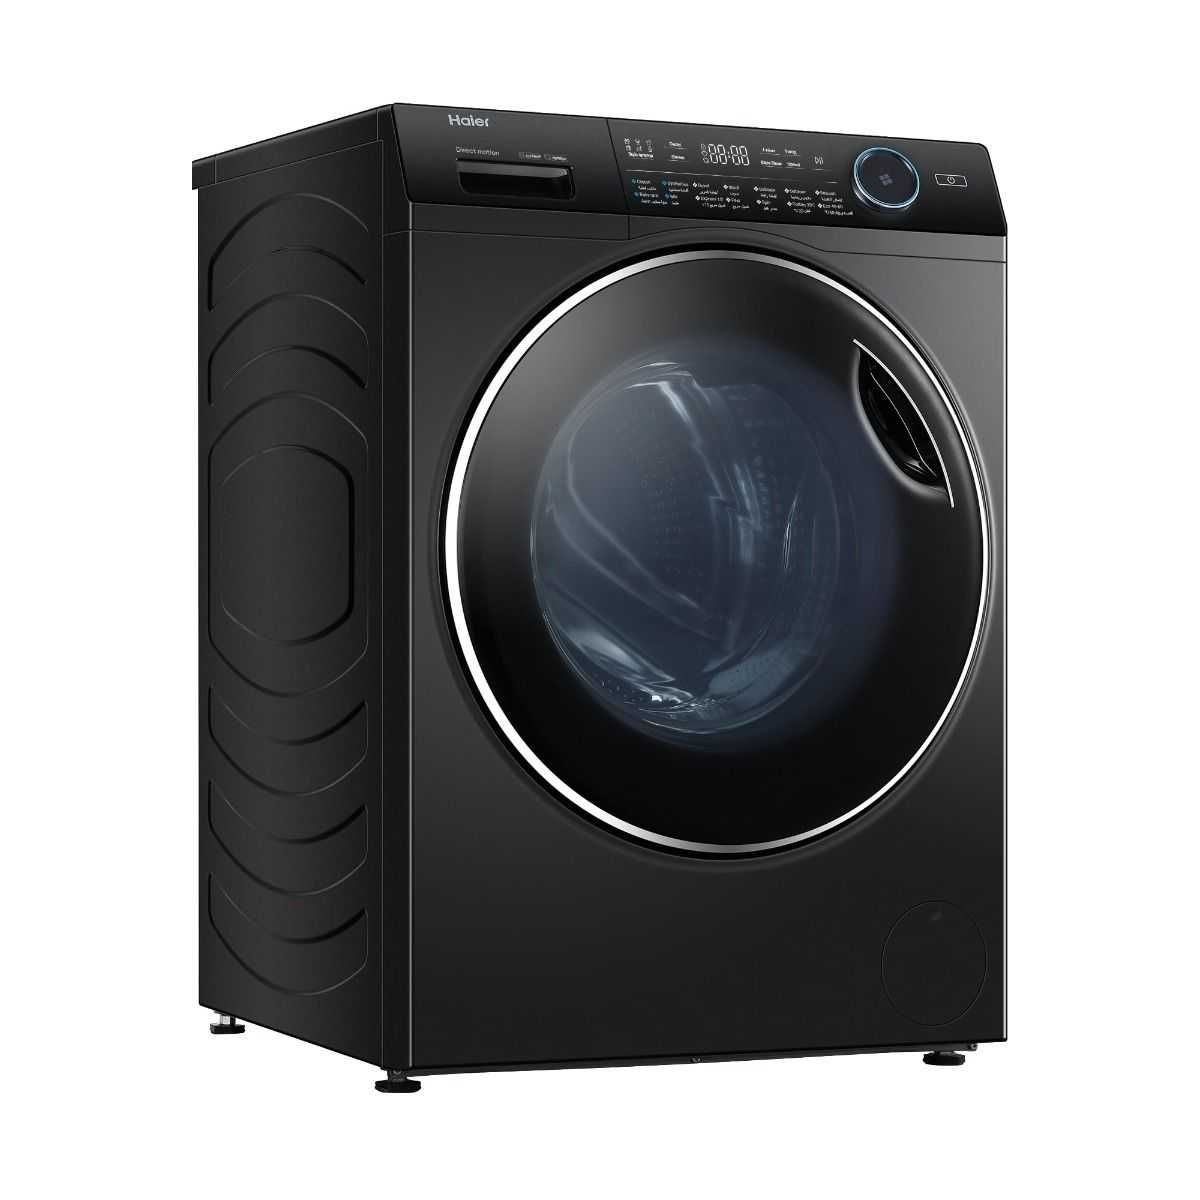 Haier Front Load Full Automatic Washing Machine With Inverter Technology, 12 kg, Dark Silver - HW120-B14979S8